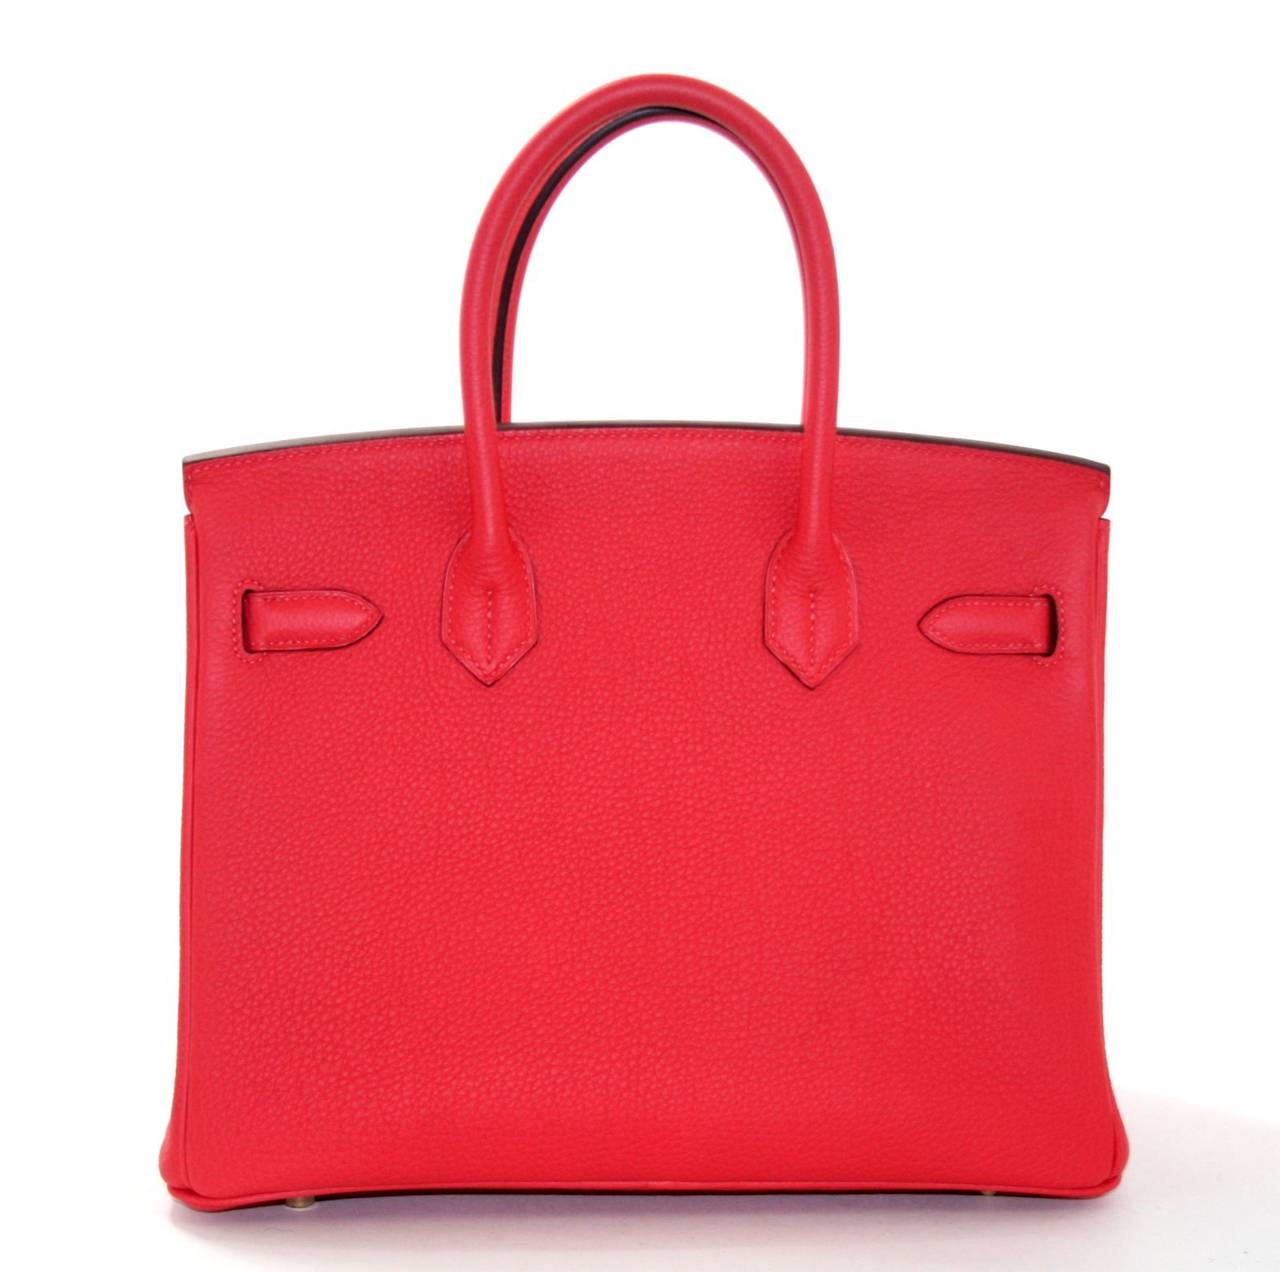 Never carried,  this Hermès 30 cm Rouge Pivoine Togo Birkin Bag is absolutely pristine.  It has been carefully stored with the original felt and the protective plastic remains intact on the hardware.  Considered the ultimate luxury item the world